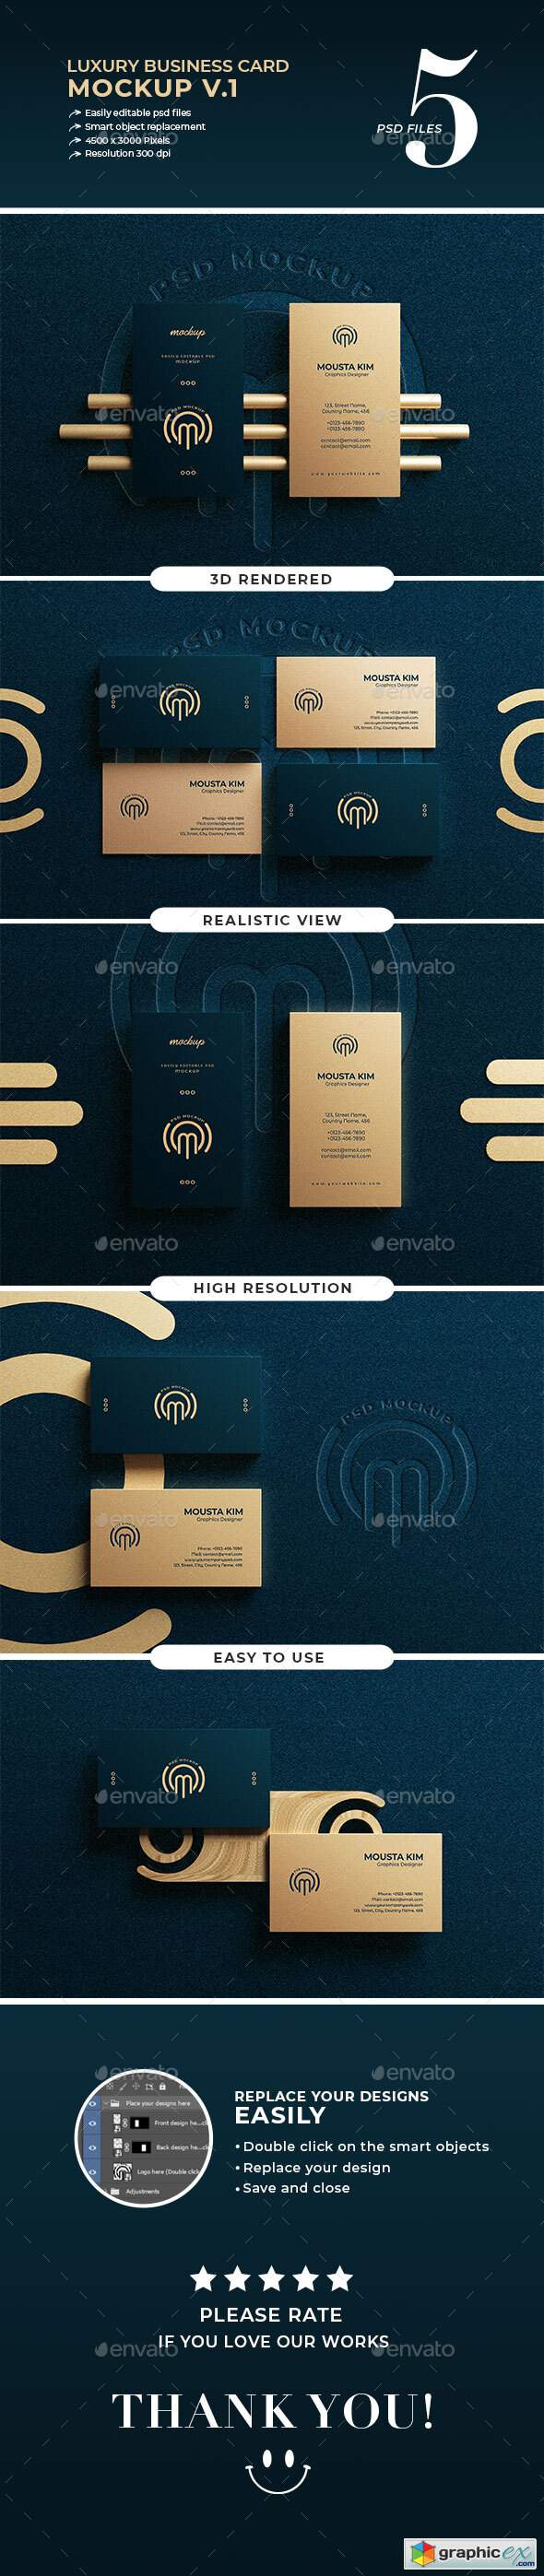 Download Luxury business card mockup v.1 » Free Download Vector Stock Image Photoshop Icon